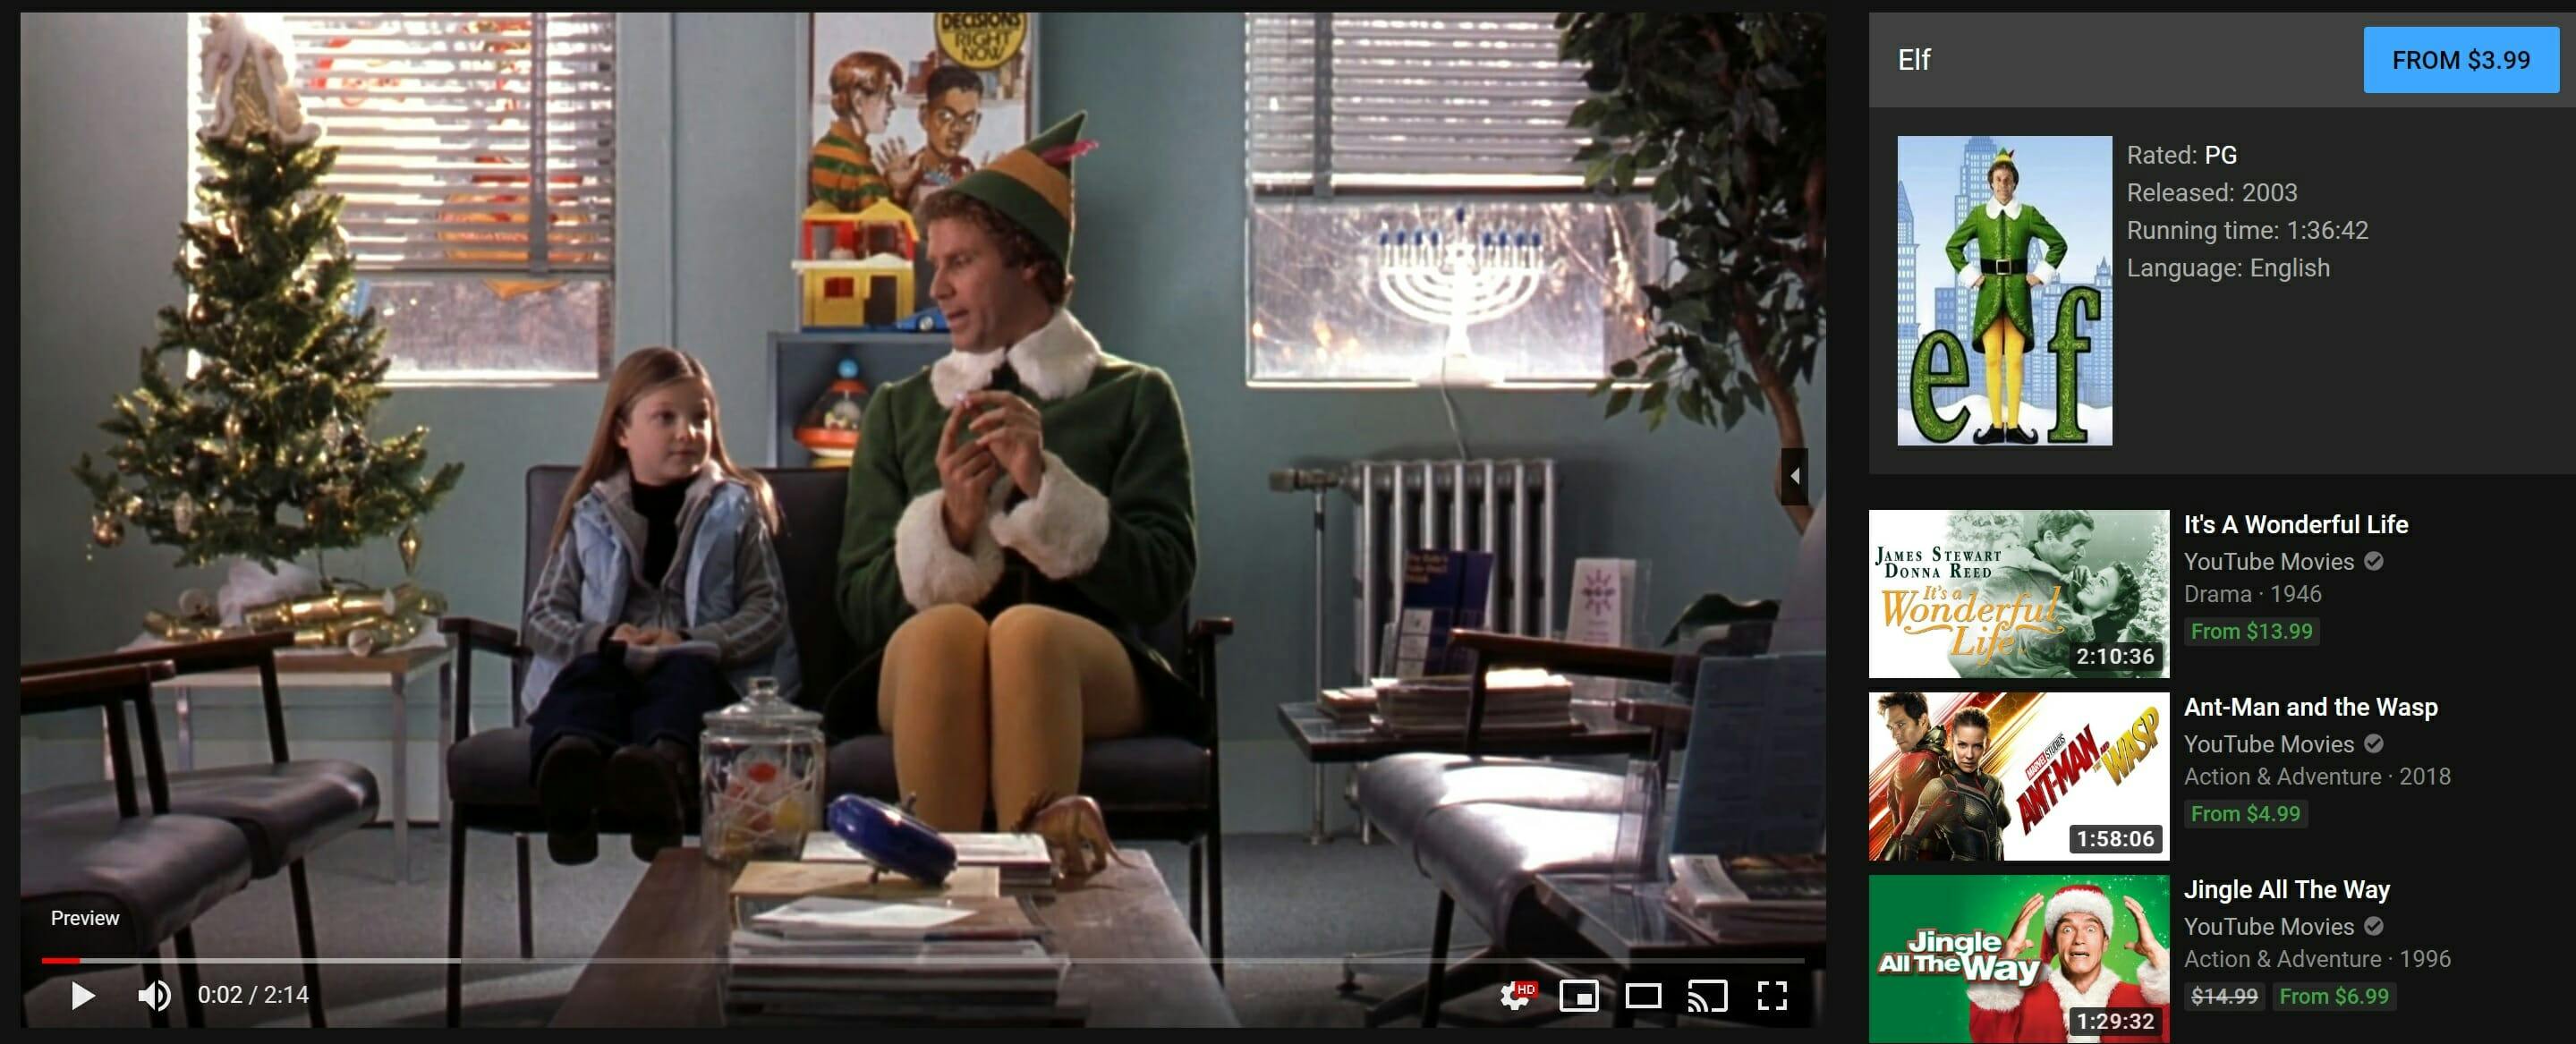 how to watch elf on demand youtube tv